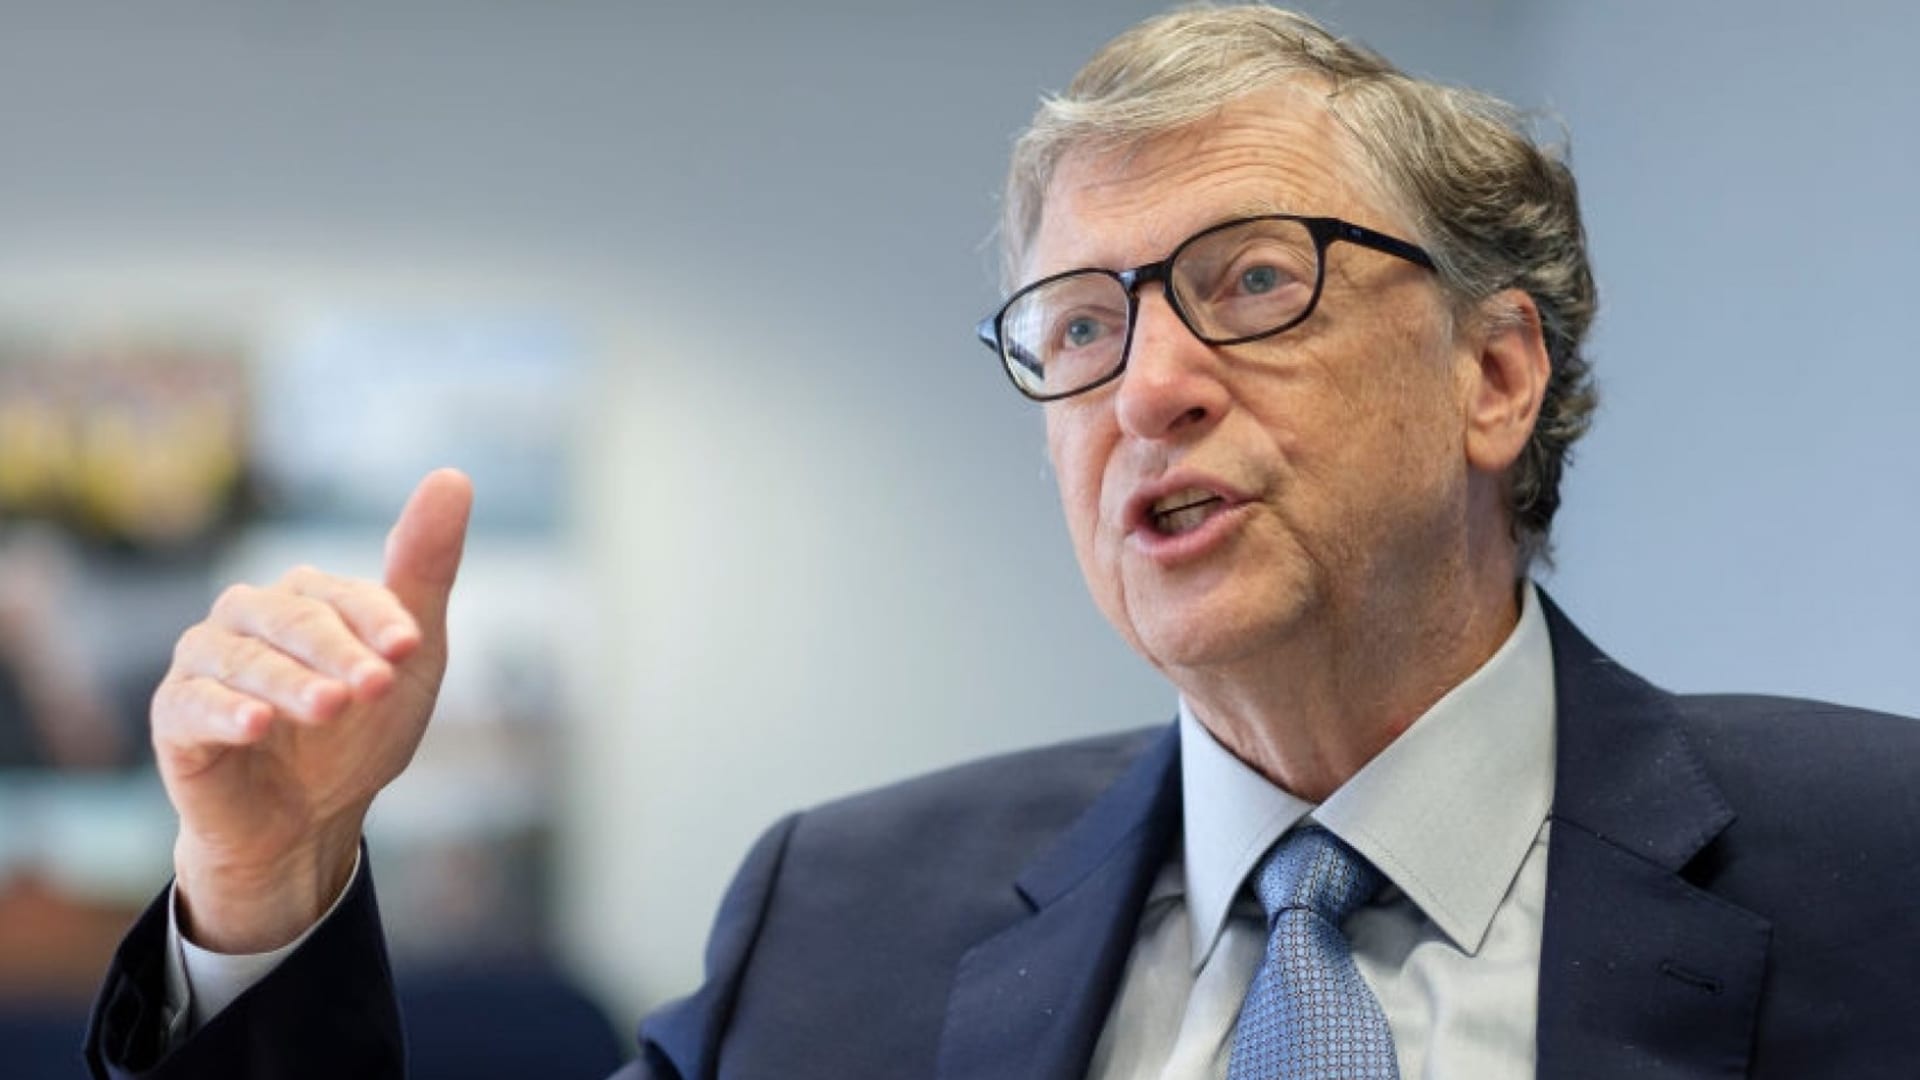 According to Bill Gates, Asking These 2 Questions Will Make You a Better Leader